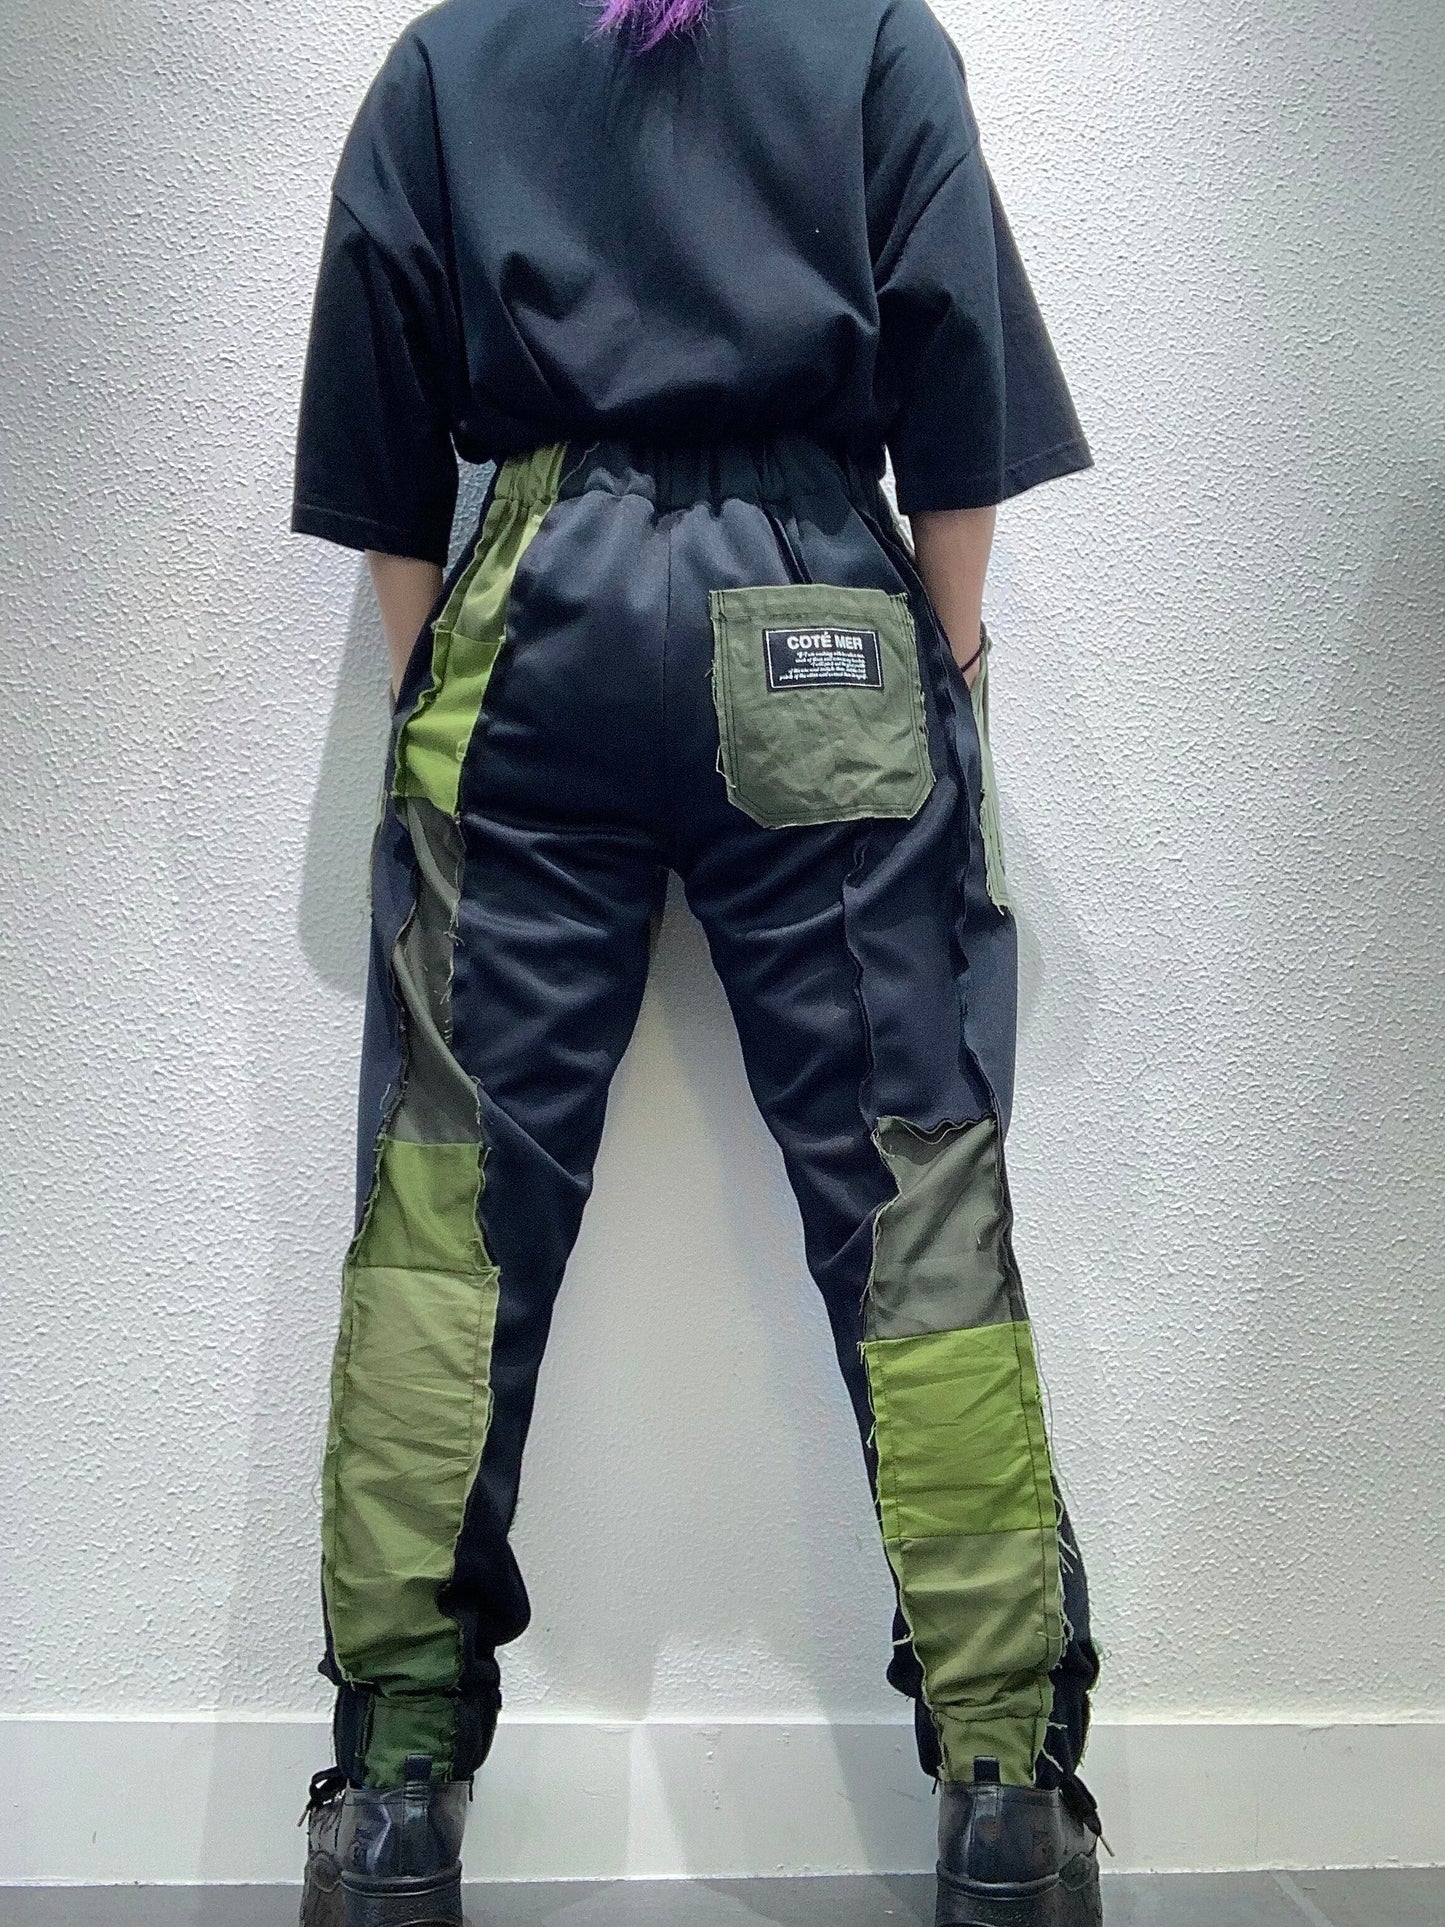 Bespoke Hypebeast Japanese Vintage Handmade Custom One and Only One Cote Mer Military Camo Khaki Fatigue Upcycle Sustainable Upscale Street Fashion Embroidered Embroidery Patch Work Boro Remake Pants Jeans Bottoms ( Size : L - XL )